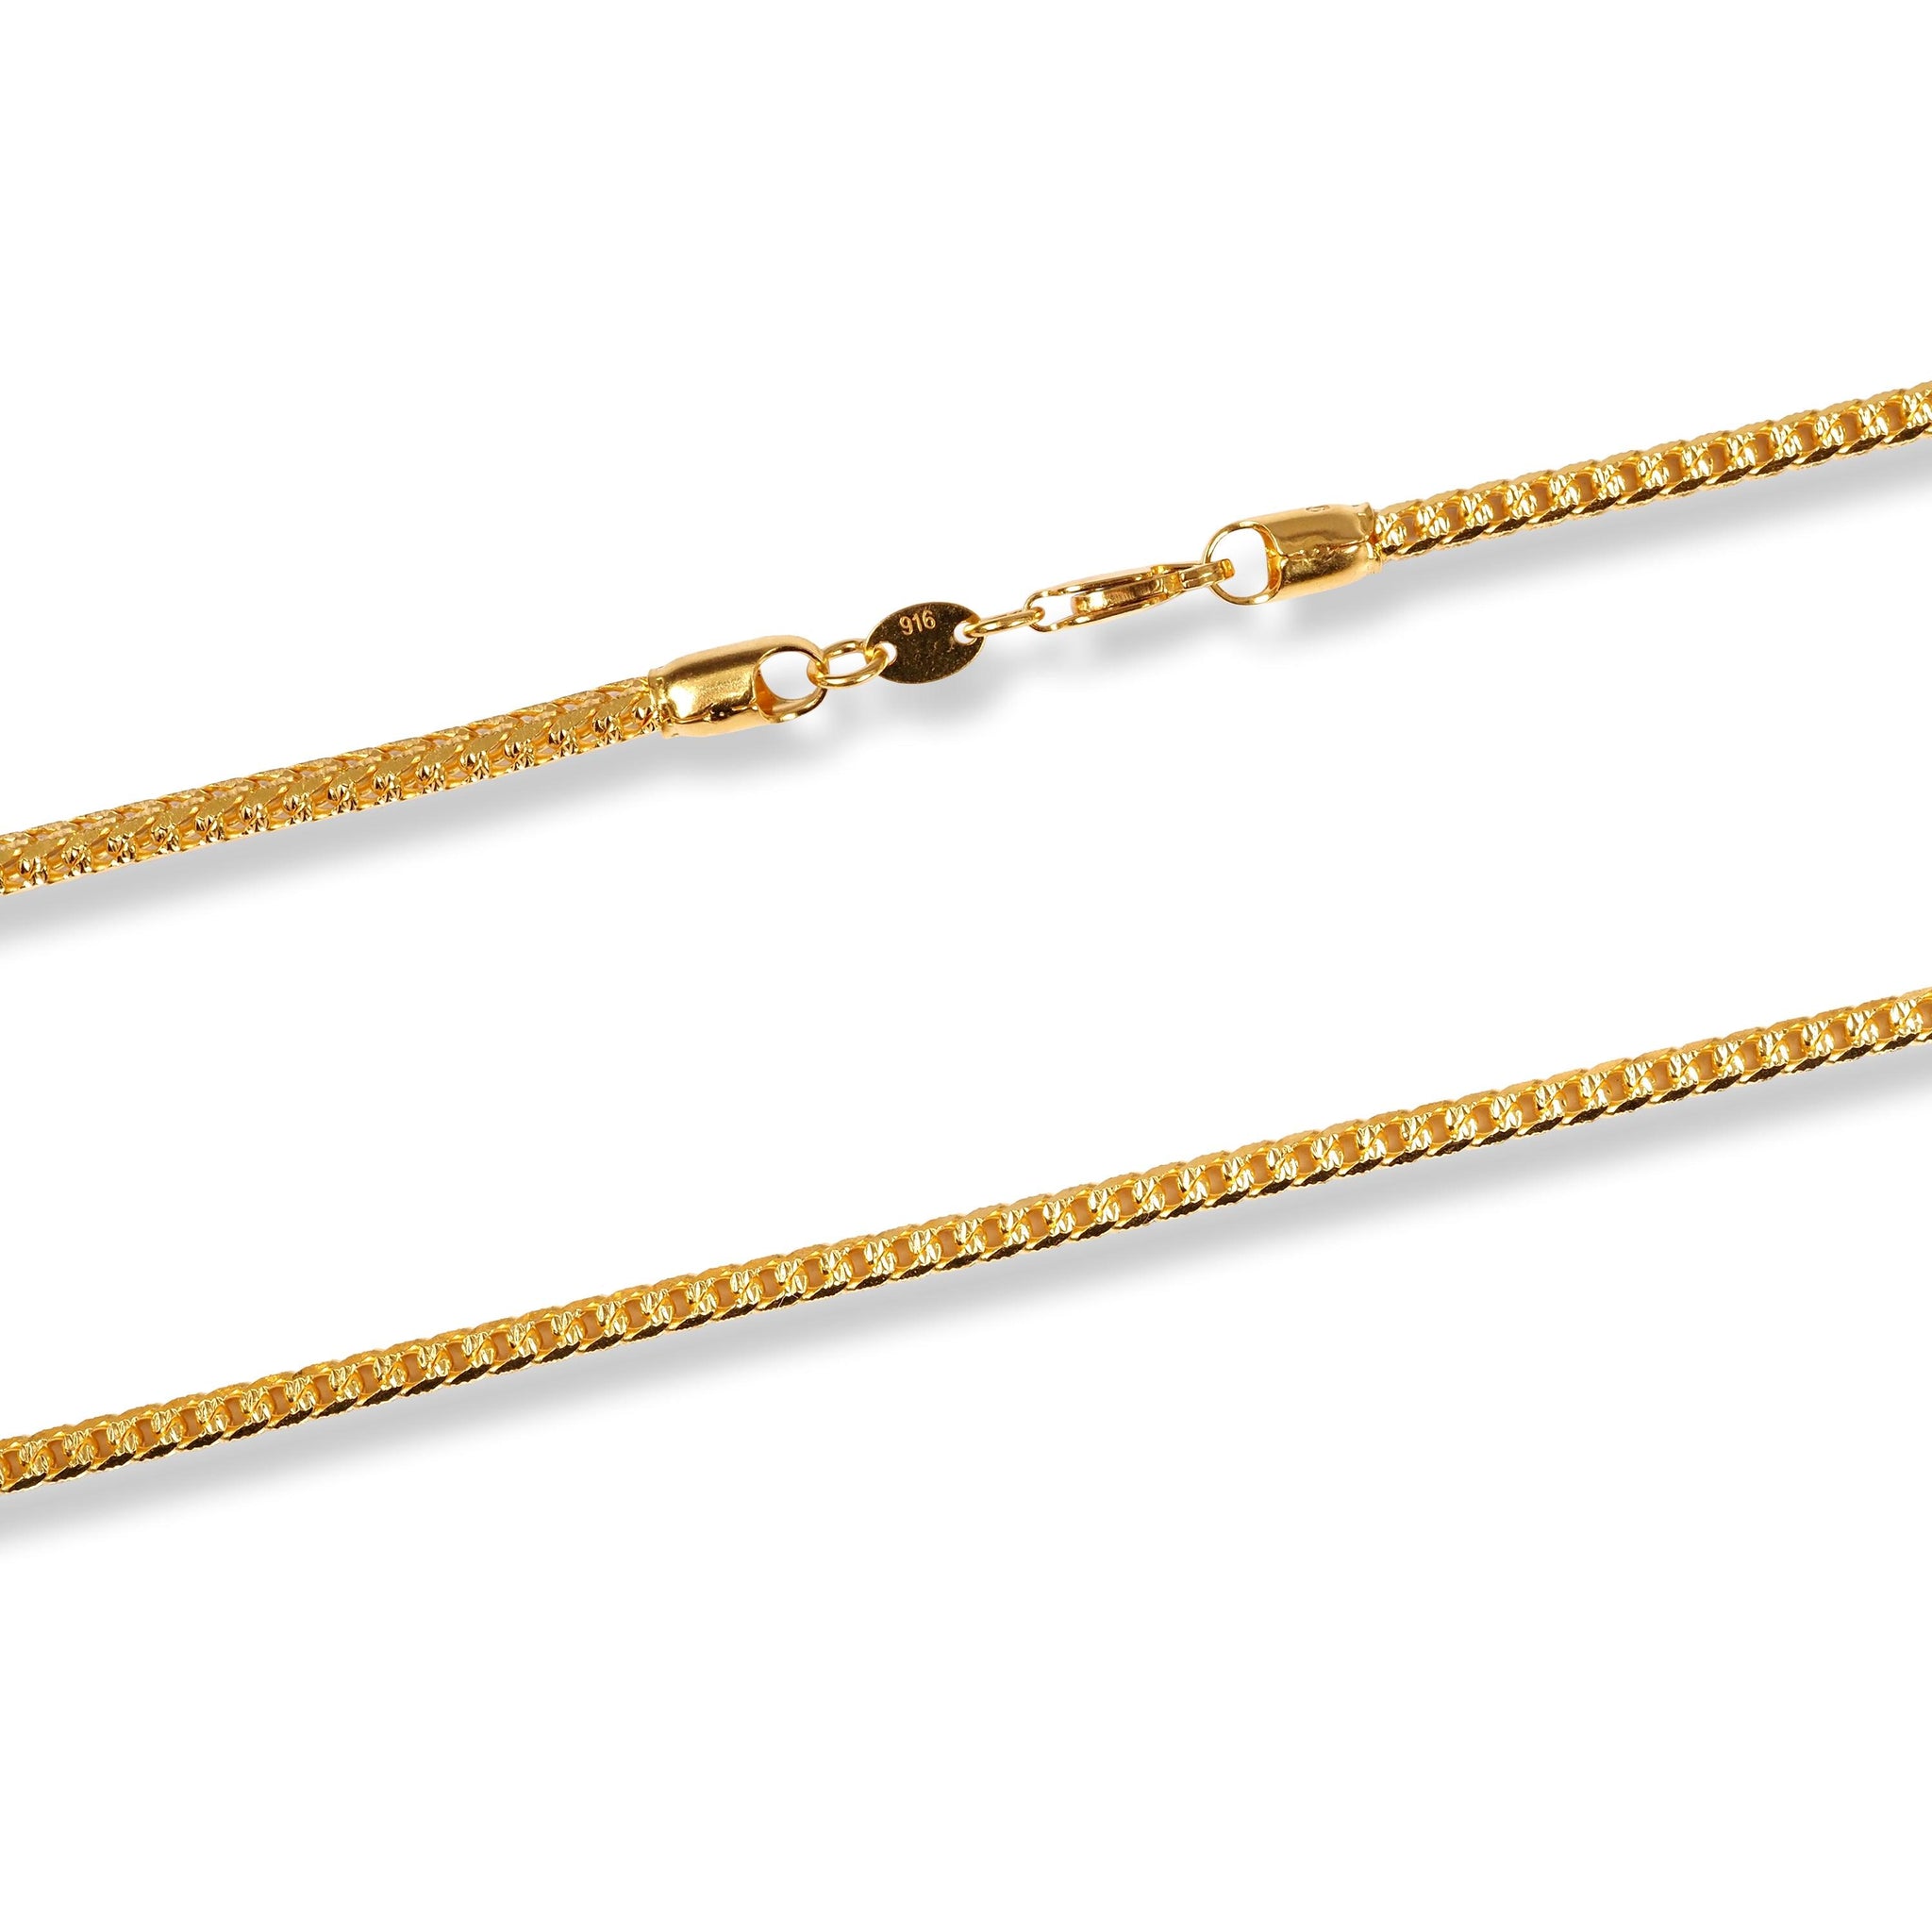 22ct Yellow Gold Foxtail Chain with Faceted Sides C-7137